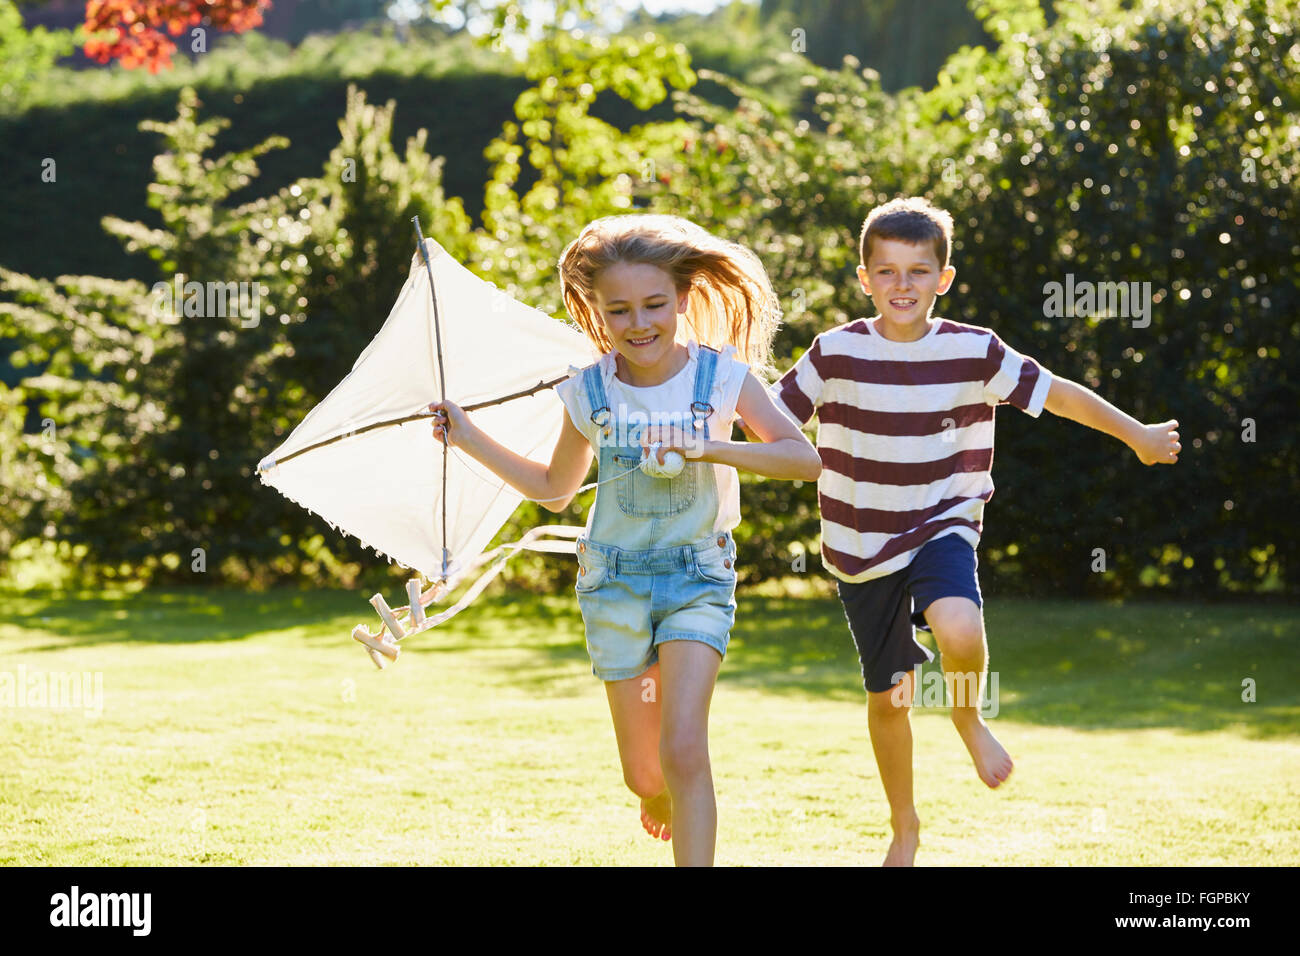 Brother and sister running with kite in sunny garden Stock Photo